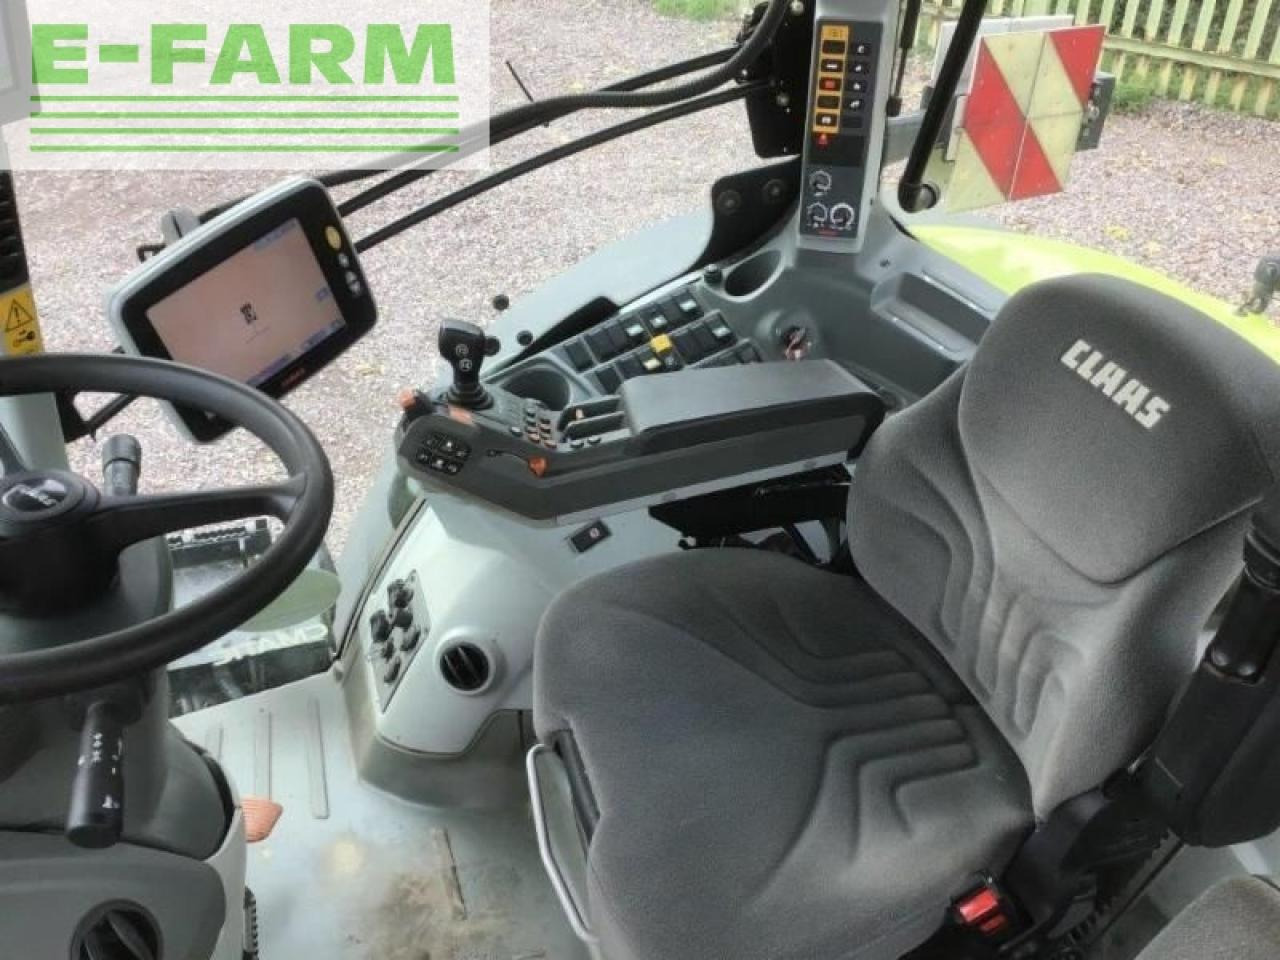 Tractor CLAAS axion 940 stage iv mr